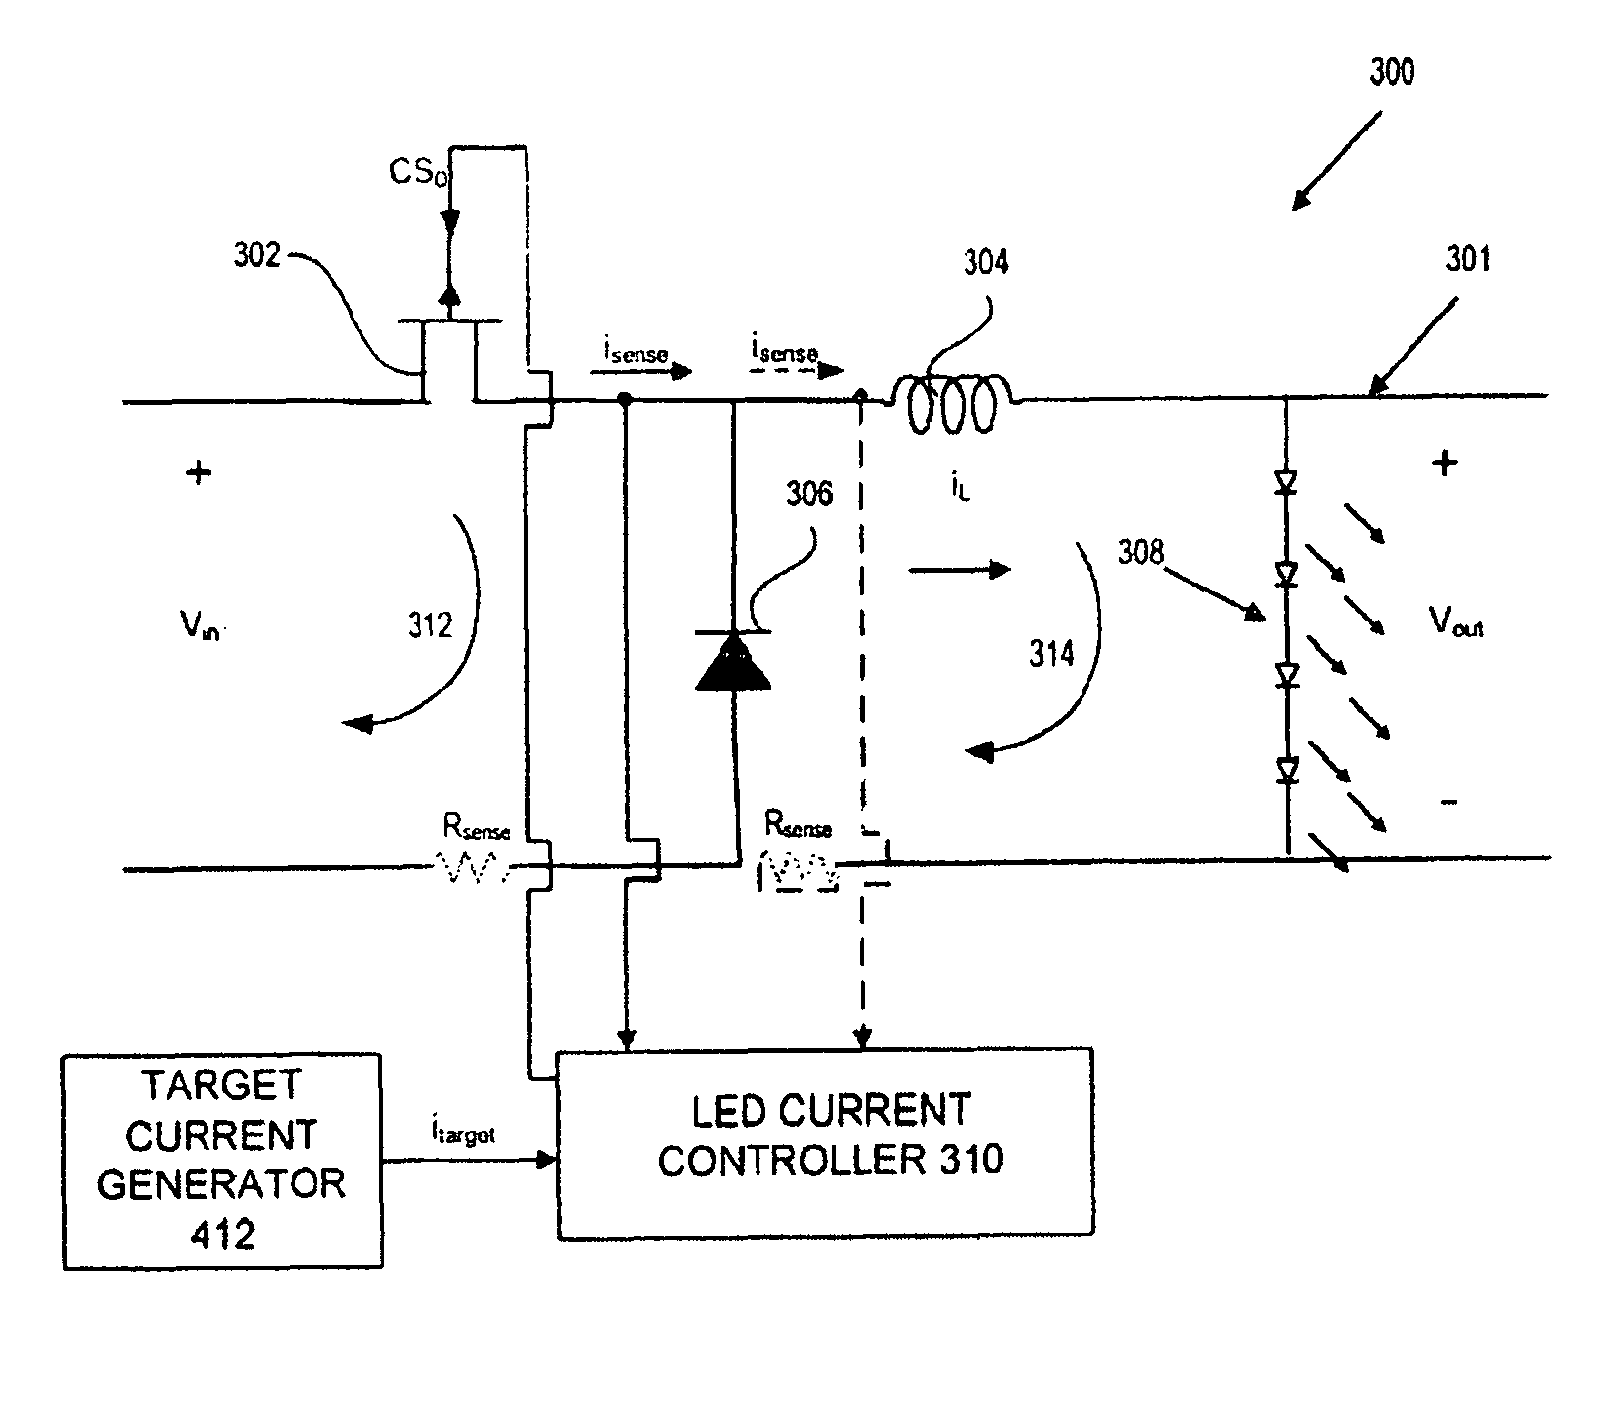 Adjustable constant current source with continuous conduction mode (“CCM”) and discontinuous conduction mode (“DCM”) operation